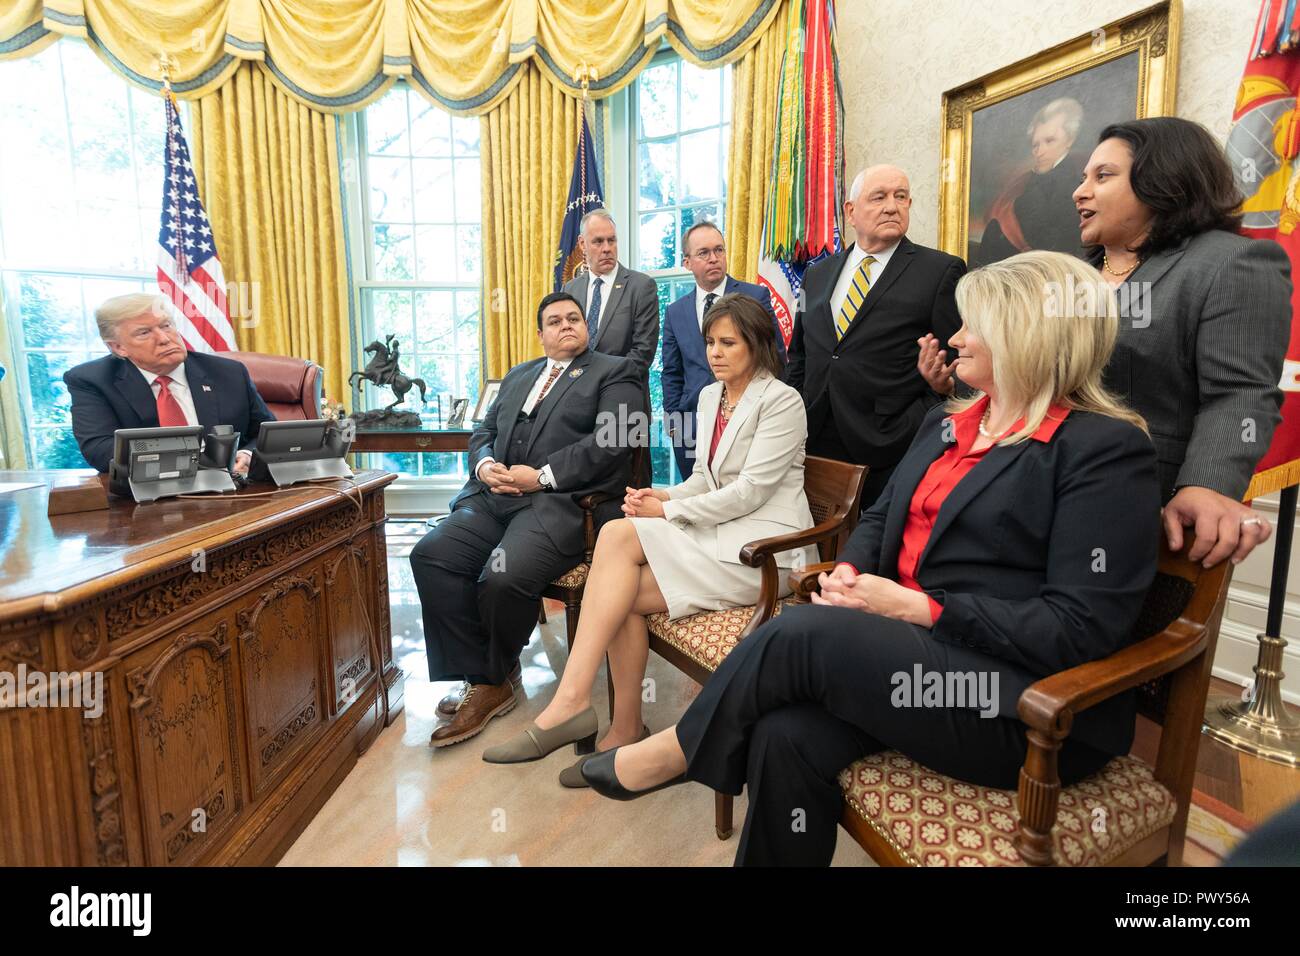 U.S President Donald Trump, joined by Cabinet members talks with workers during the “Cutting the Red Tape and Unleashing Economic Freedom” event in the Oval Office of the White House October 17, 2018 in Washington, DC. Stock Photo